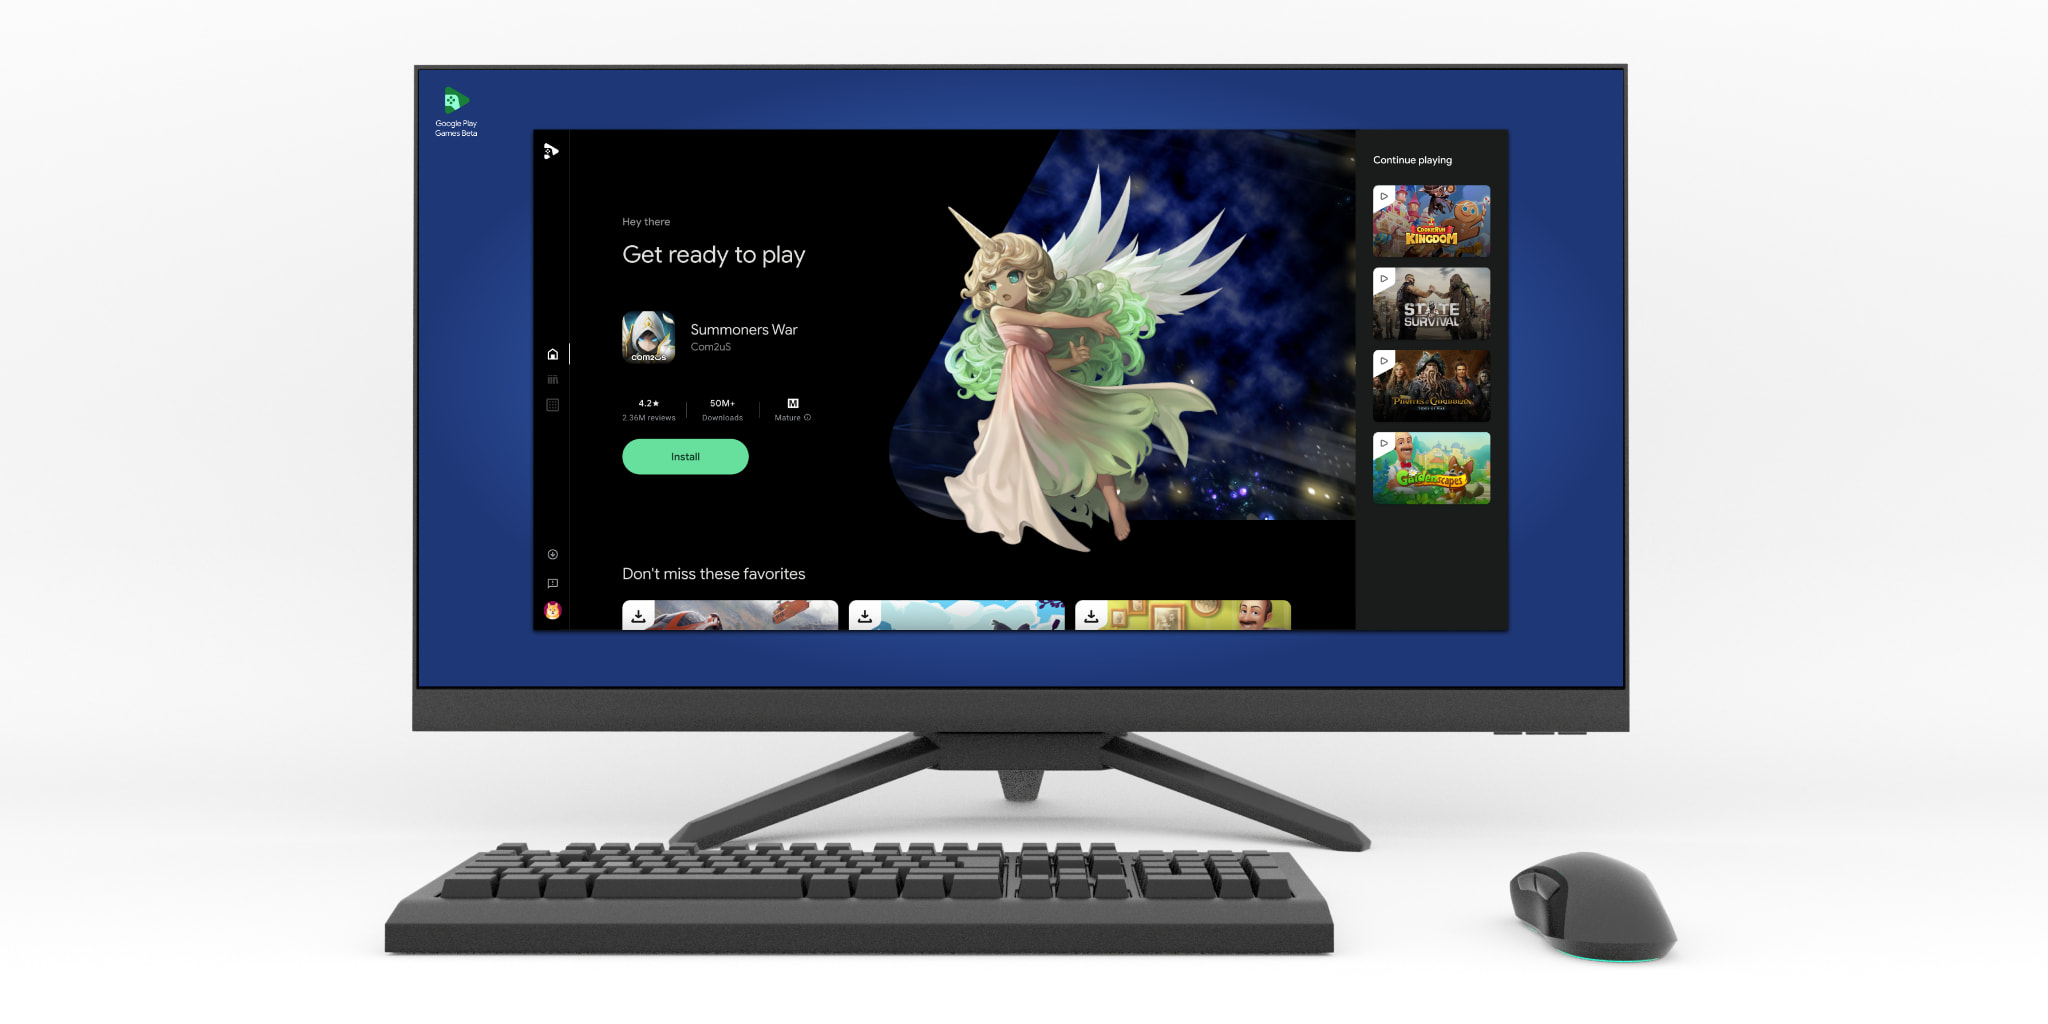 Google Play Games Beta Brings Support for 'Seamless' Android Gaming to  Windows PCs